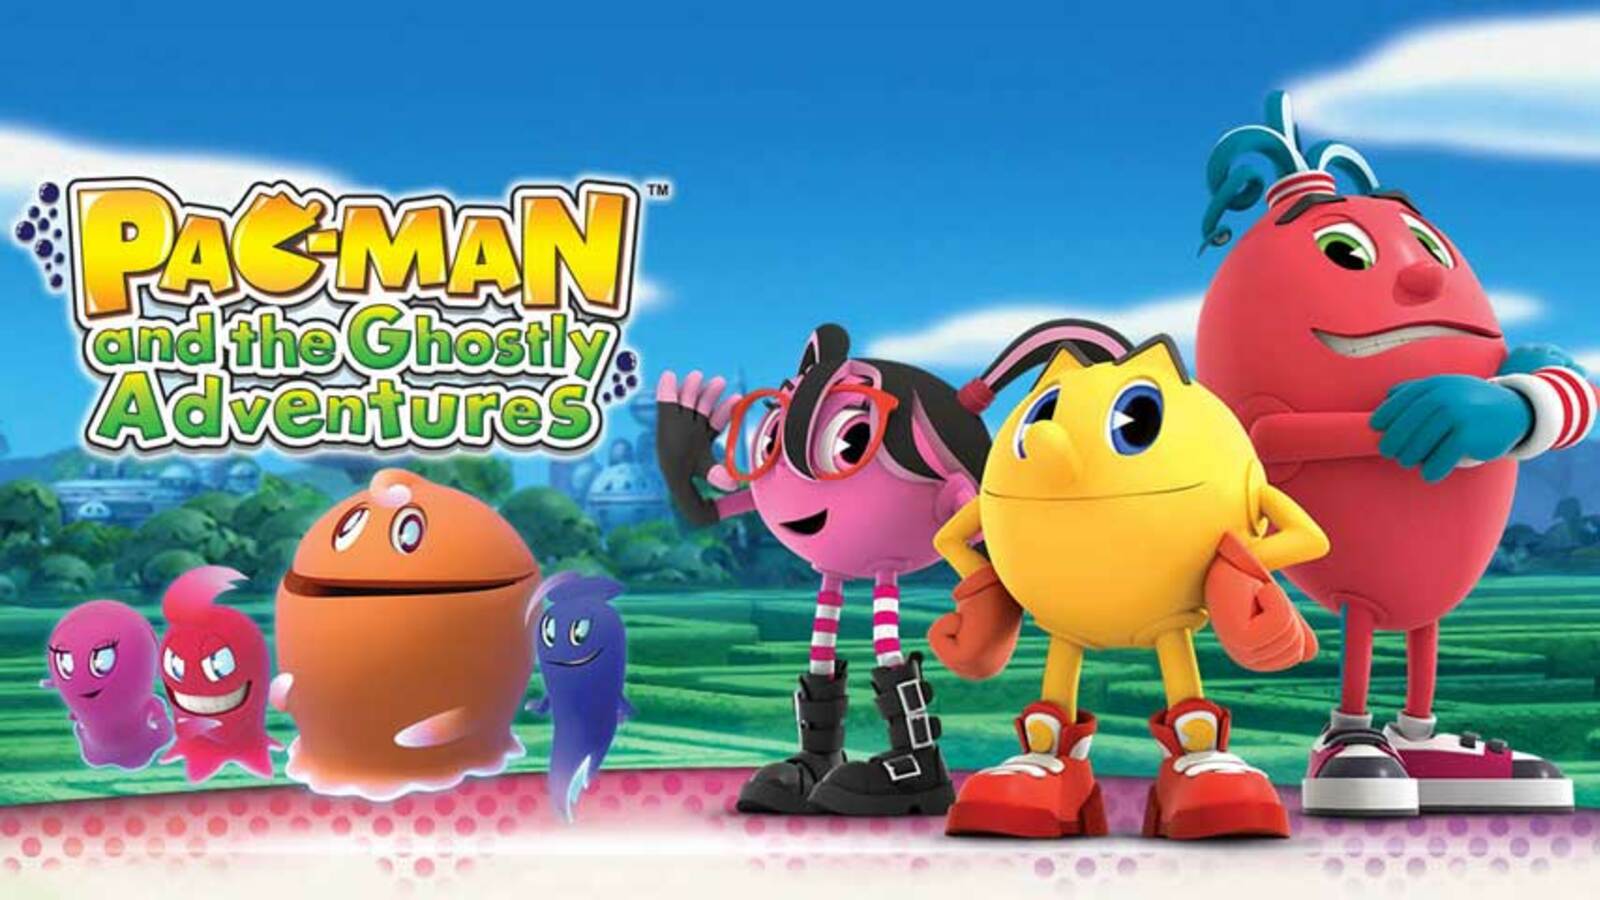 Pac Man And The Ghostly Adventures 2 Headed To 3DS, PS Wii U And Xbox 360